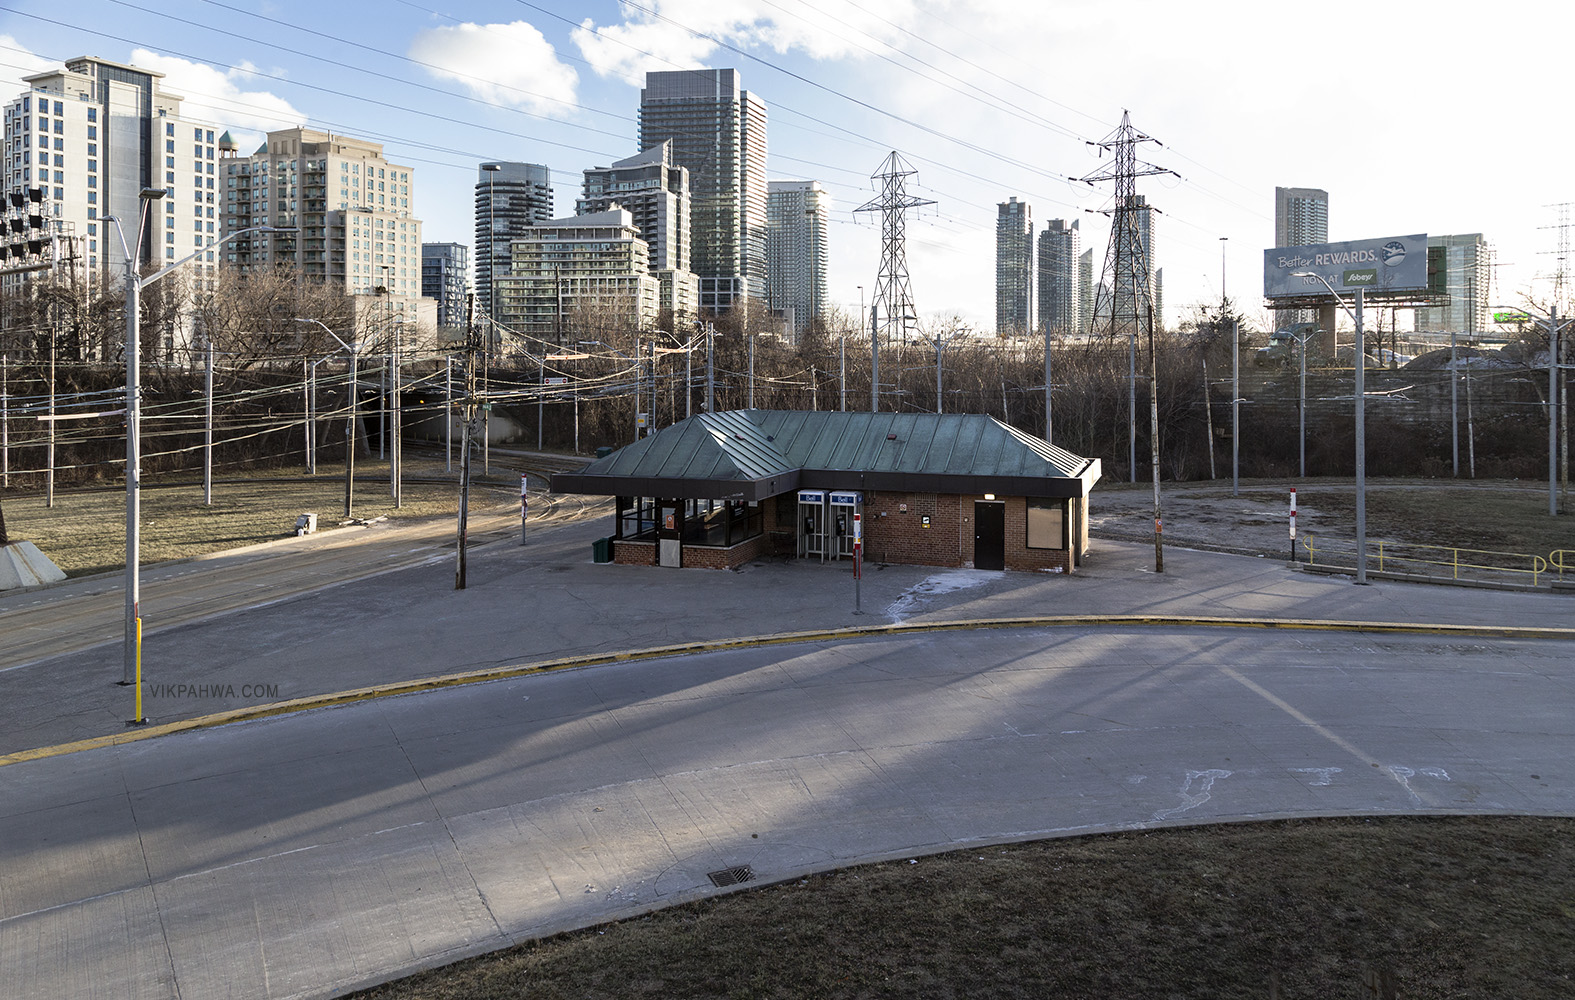 20170109. The Humber Loop on #TTC Route 501 Queen closed yesterd